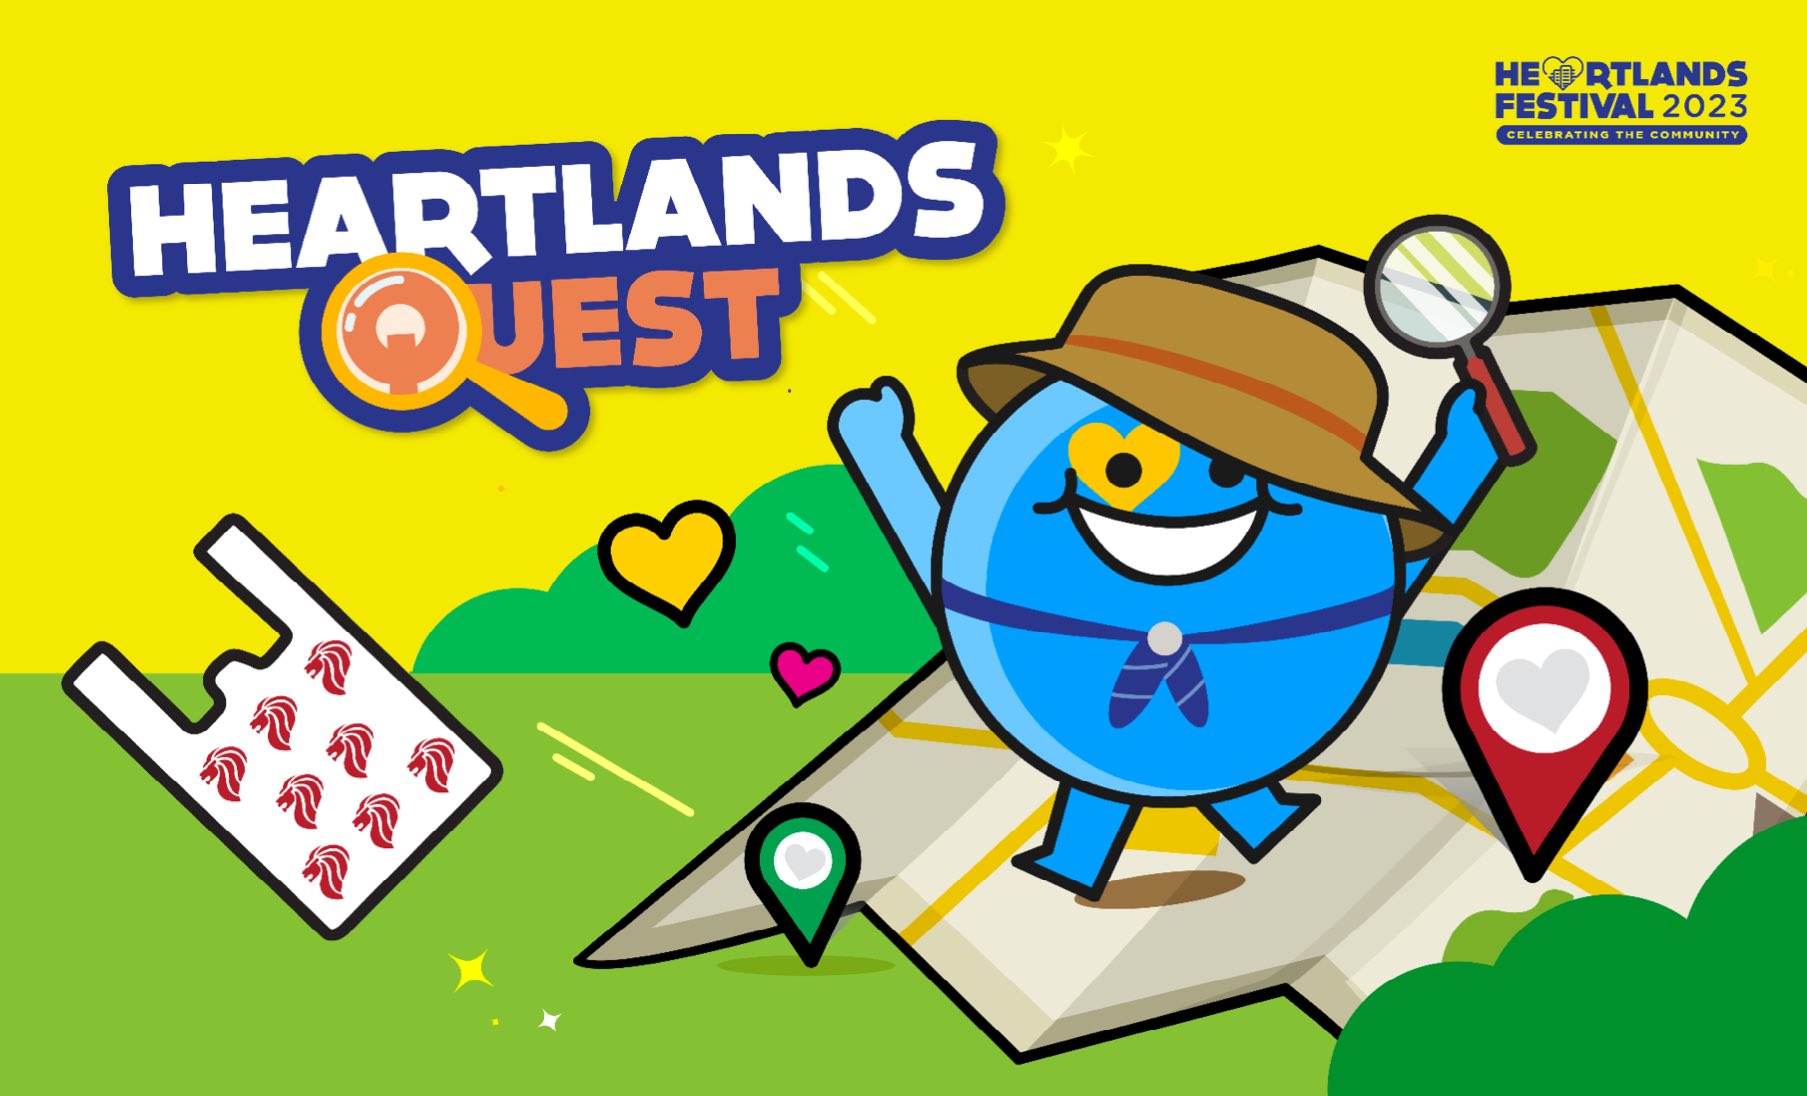 , Quests, themed races and lucky draws: Heartlands Festival 2023 goes all out to celebrate the community